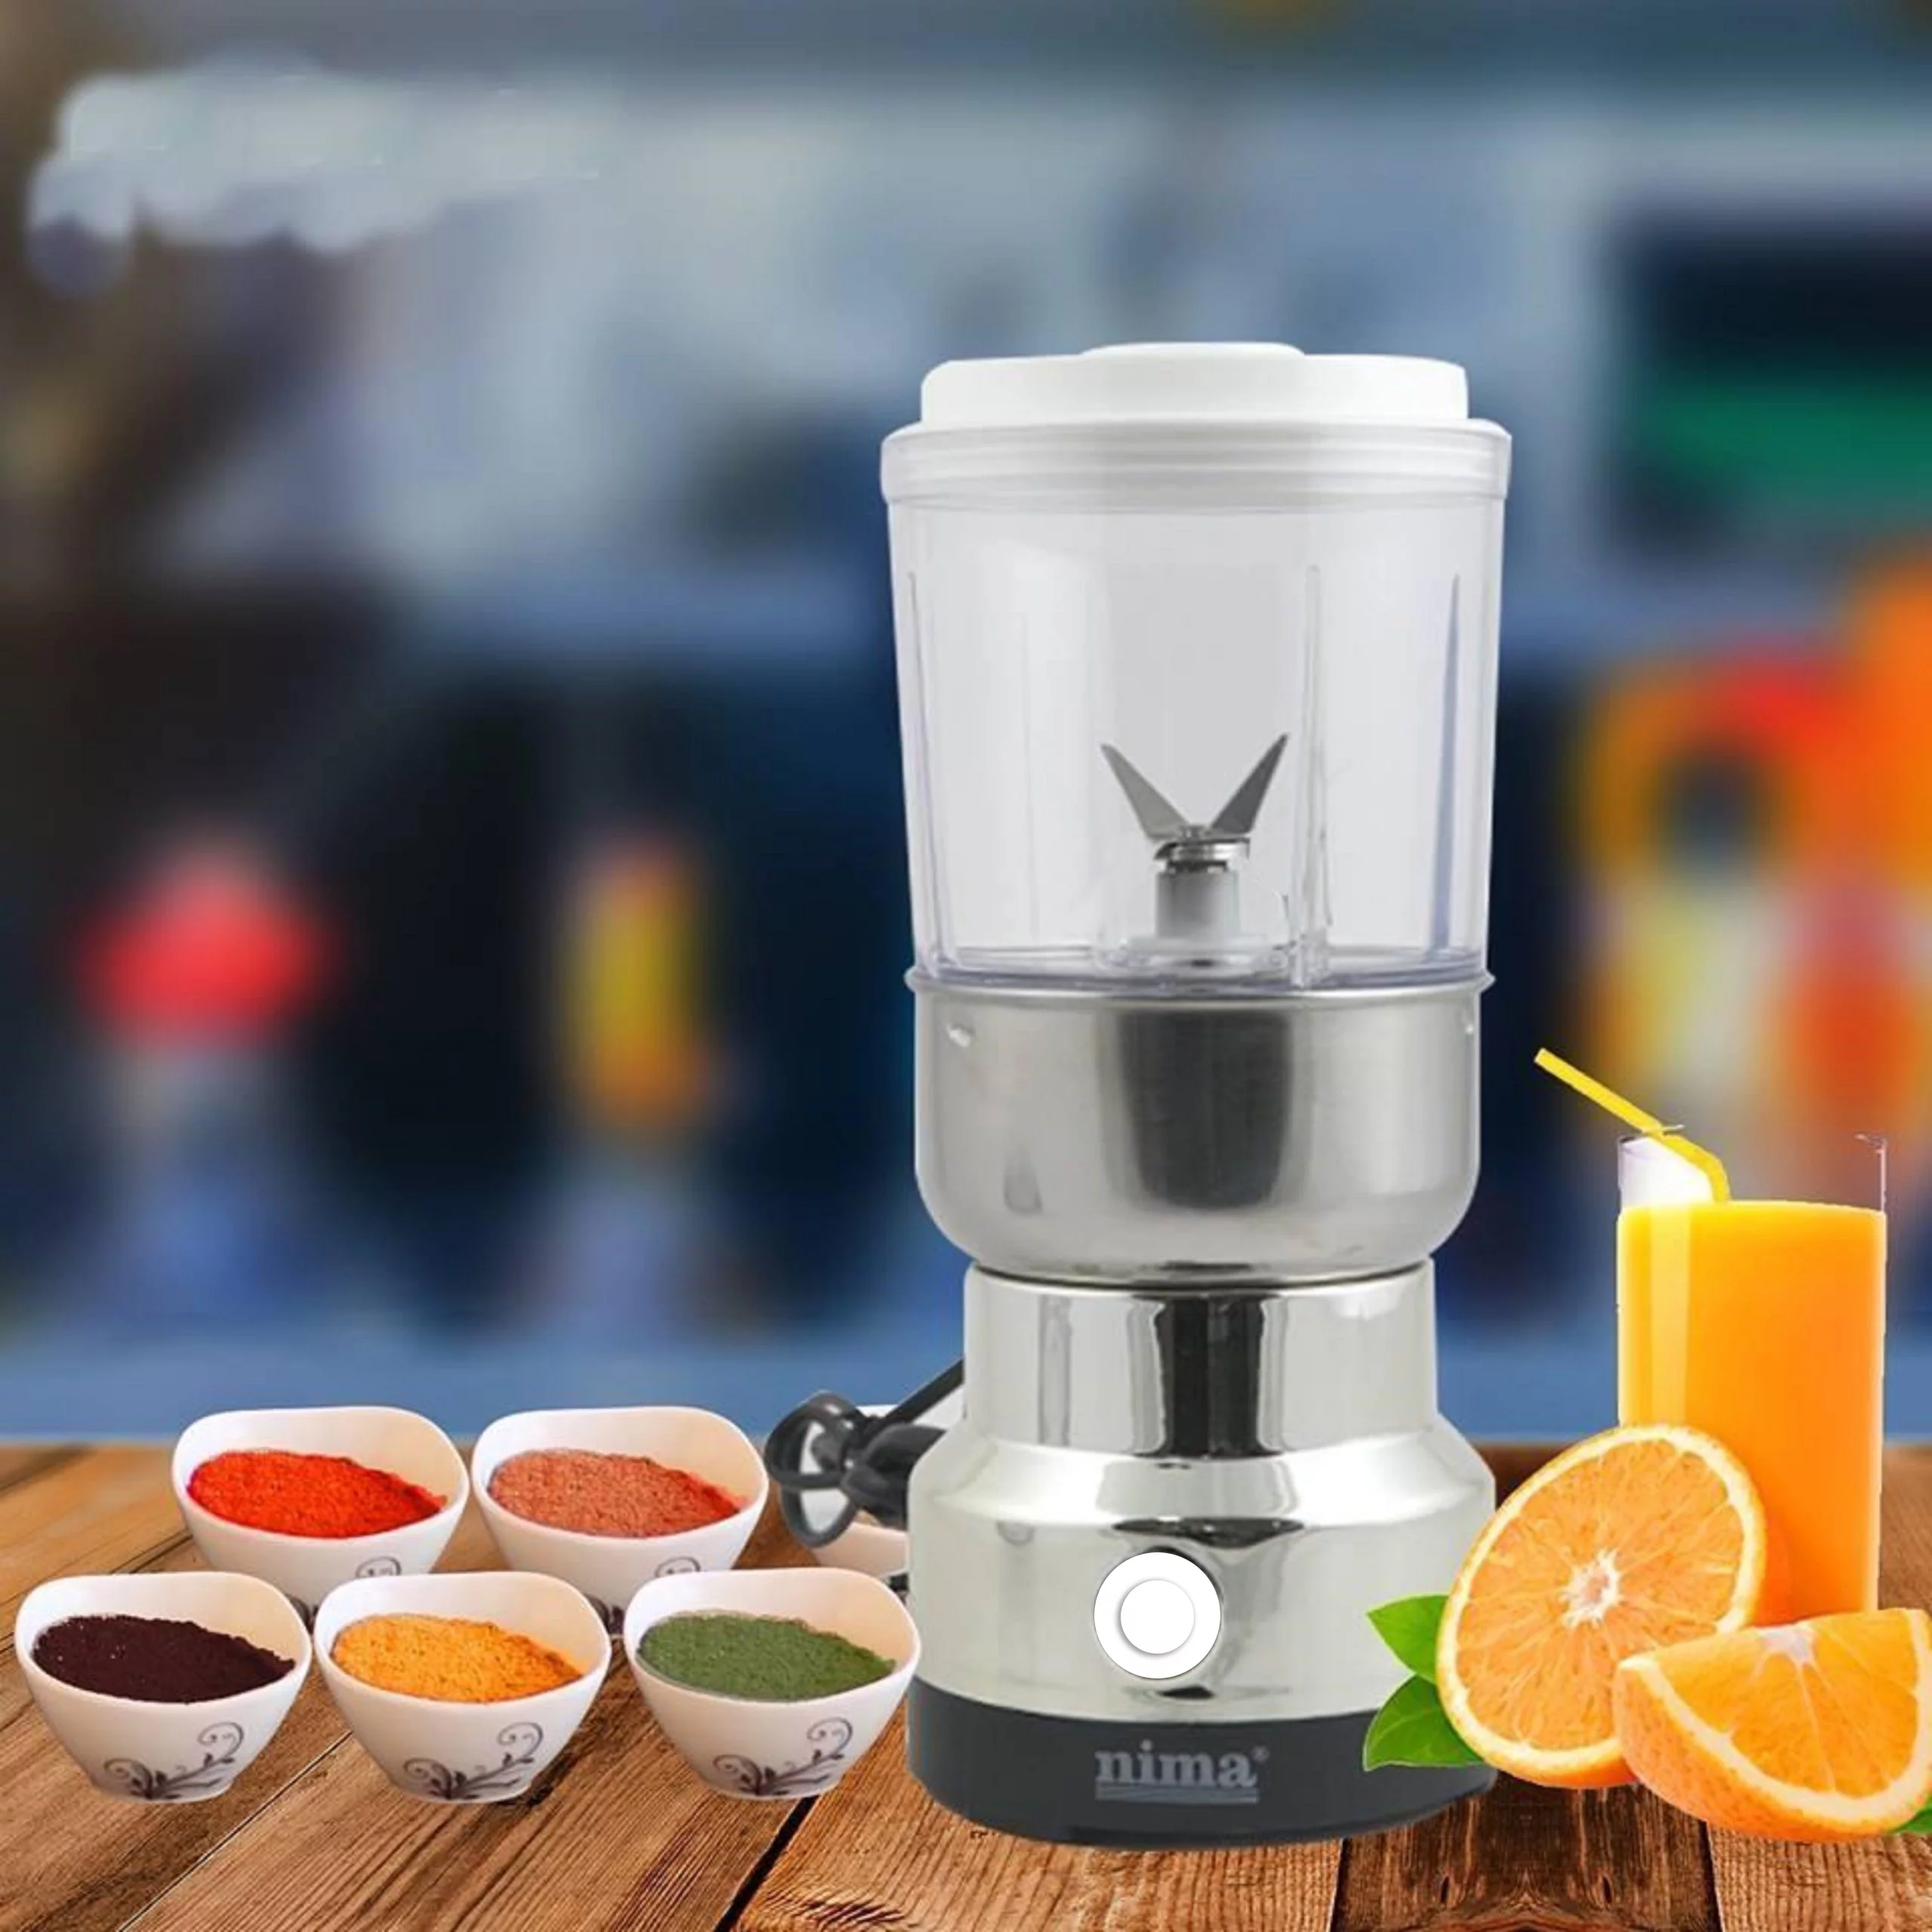 Nima-2-in-1-Coffee-and-Juce-Electric-Grinder